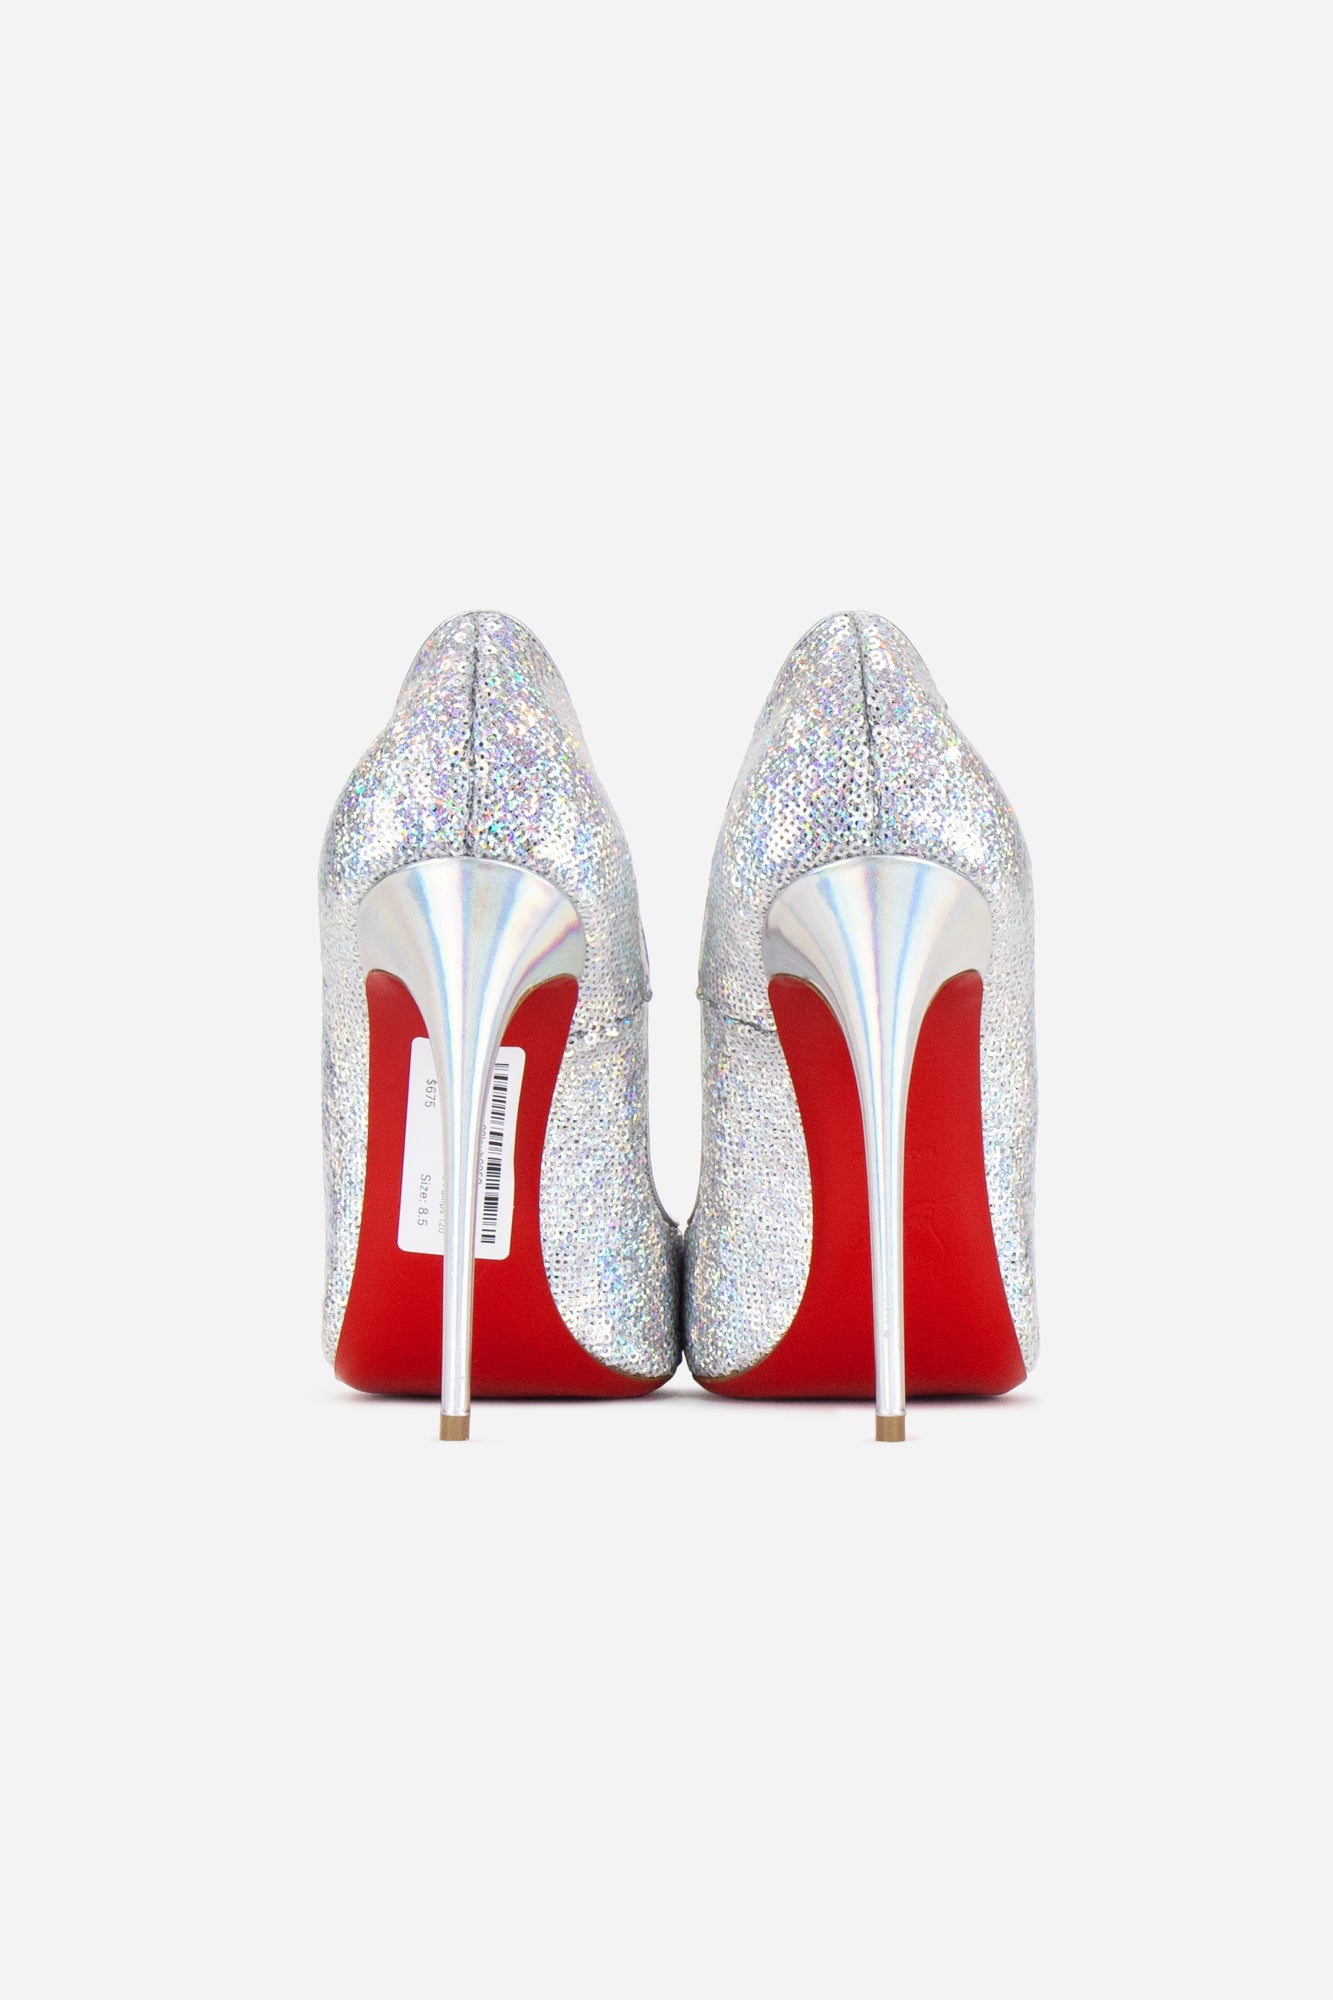 Silver Holographic So Kate Pumps 120